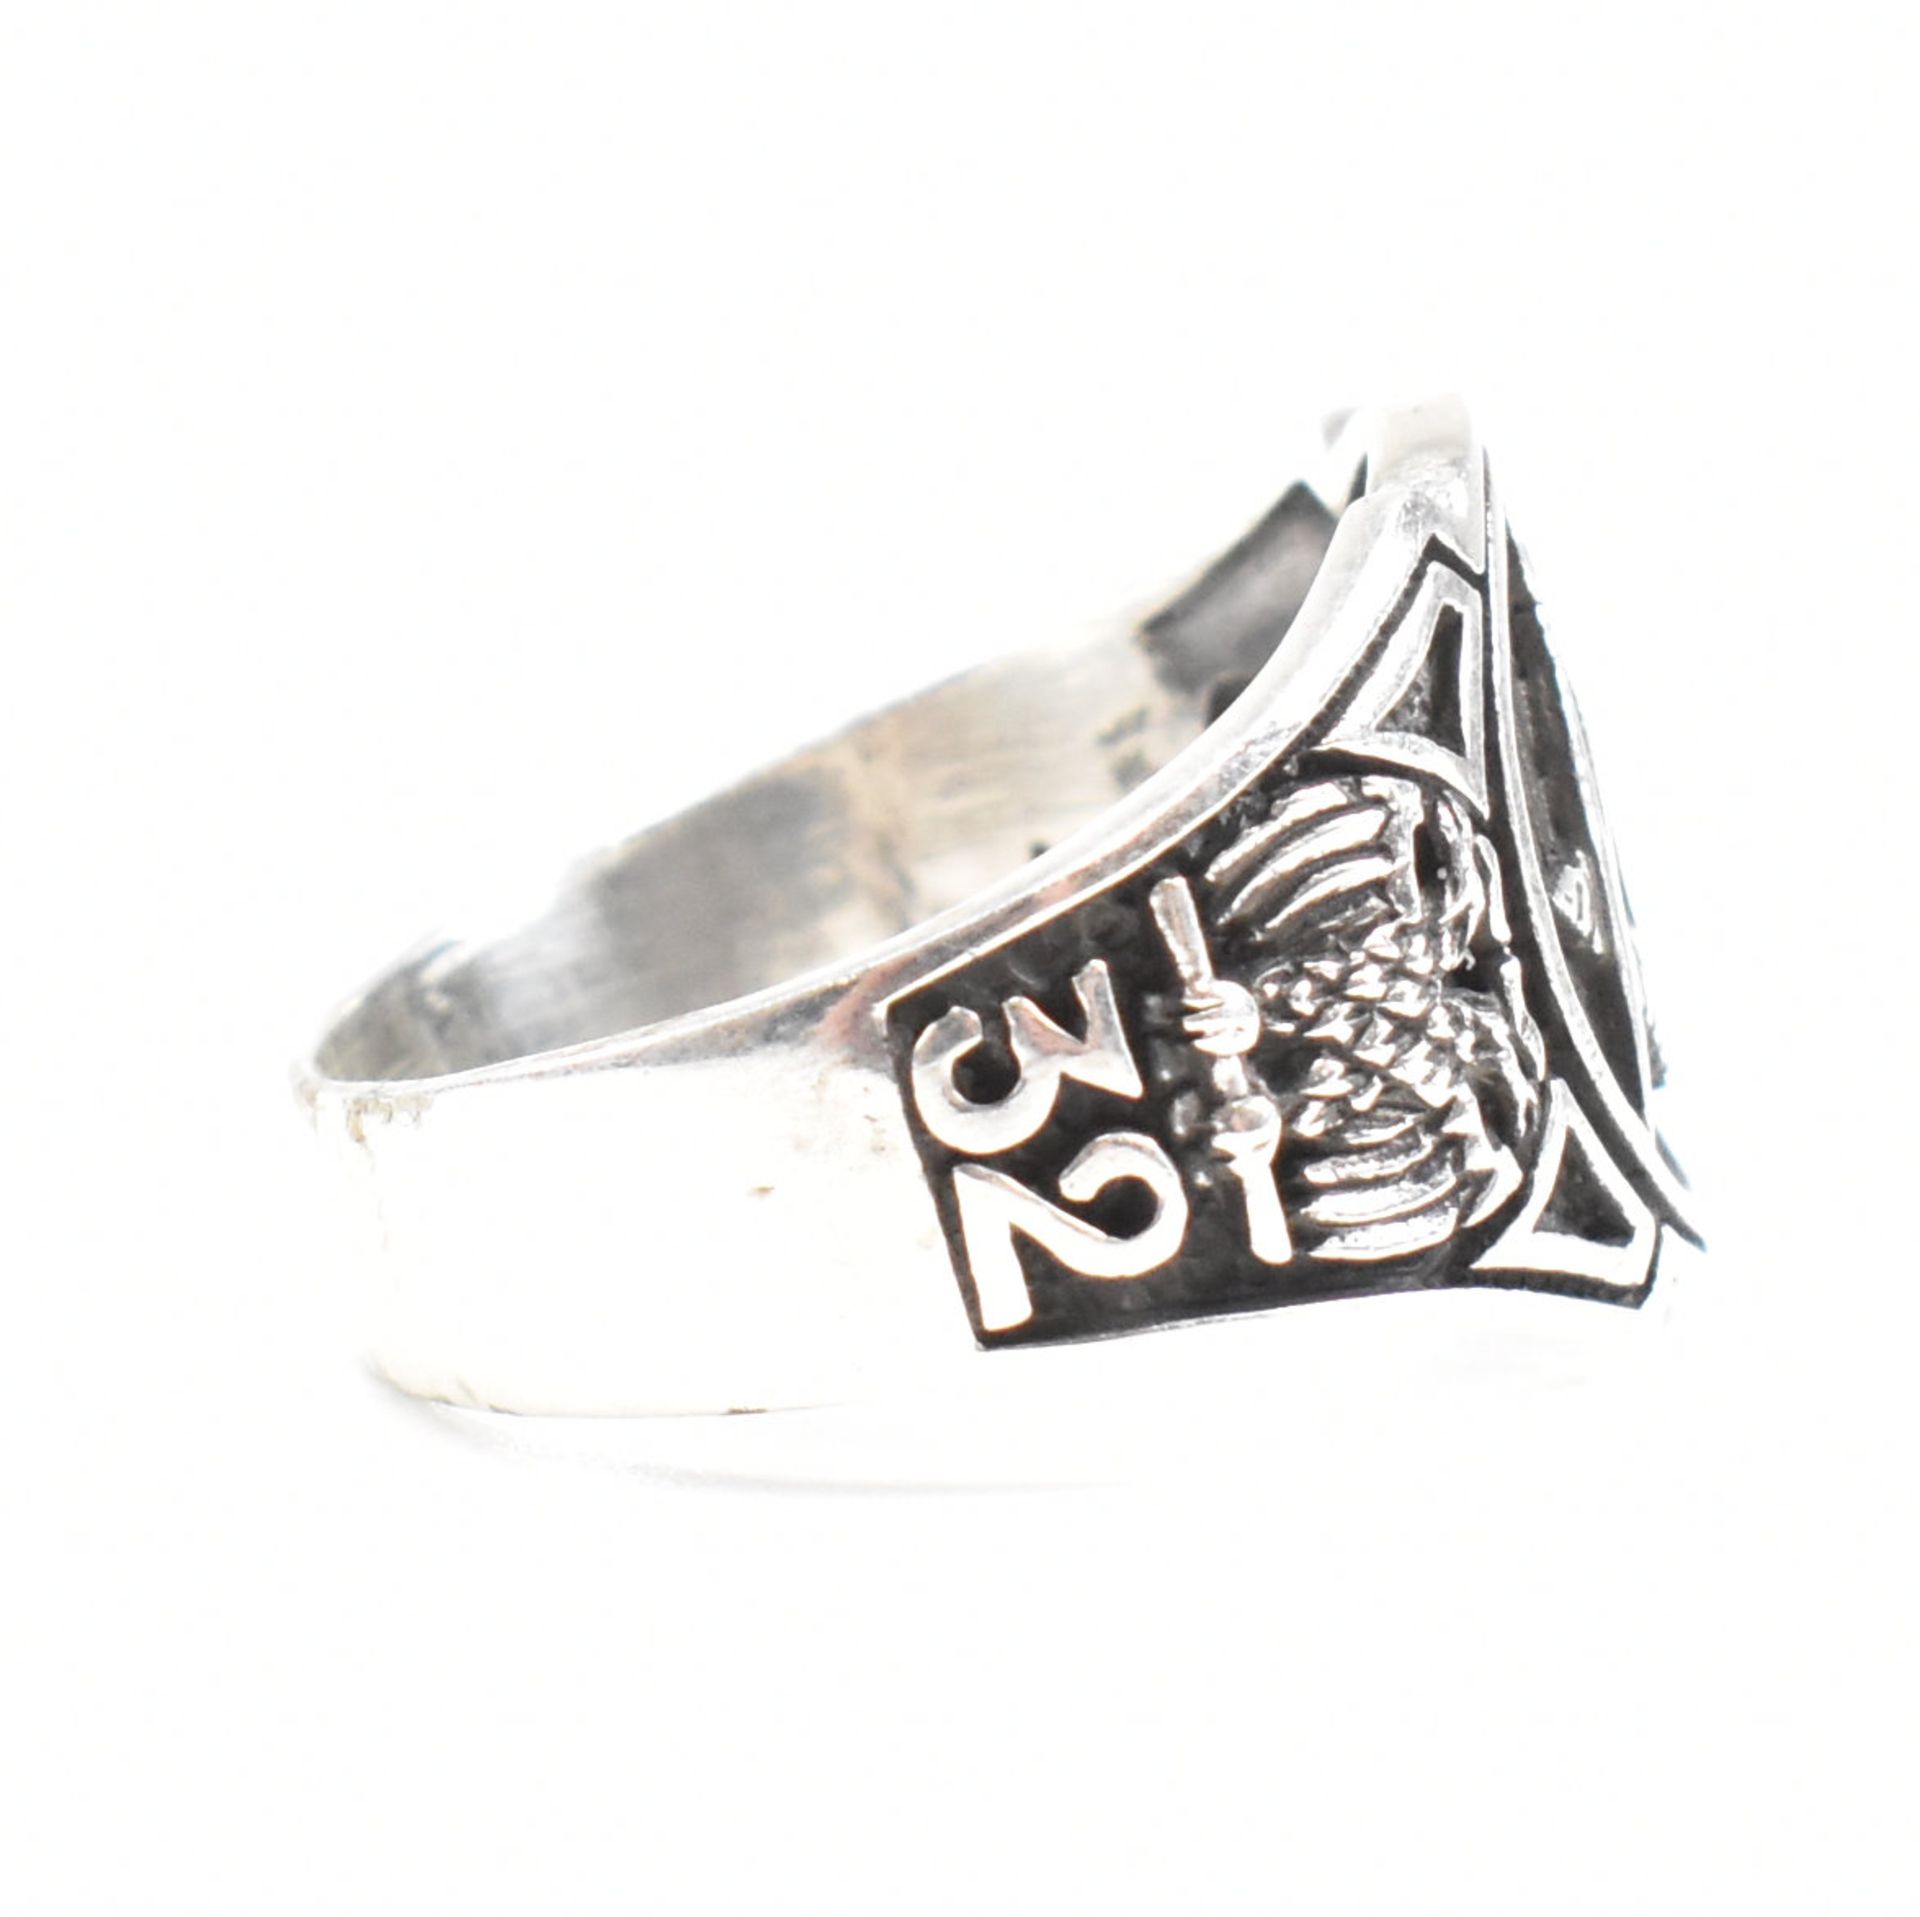 CONTEMPORARY 925 SILVER MASONIC STYLE RING - Image 2 of 7